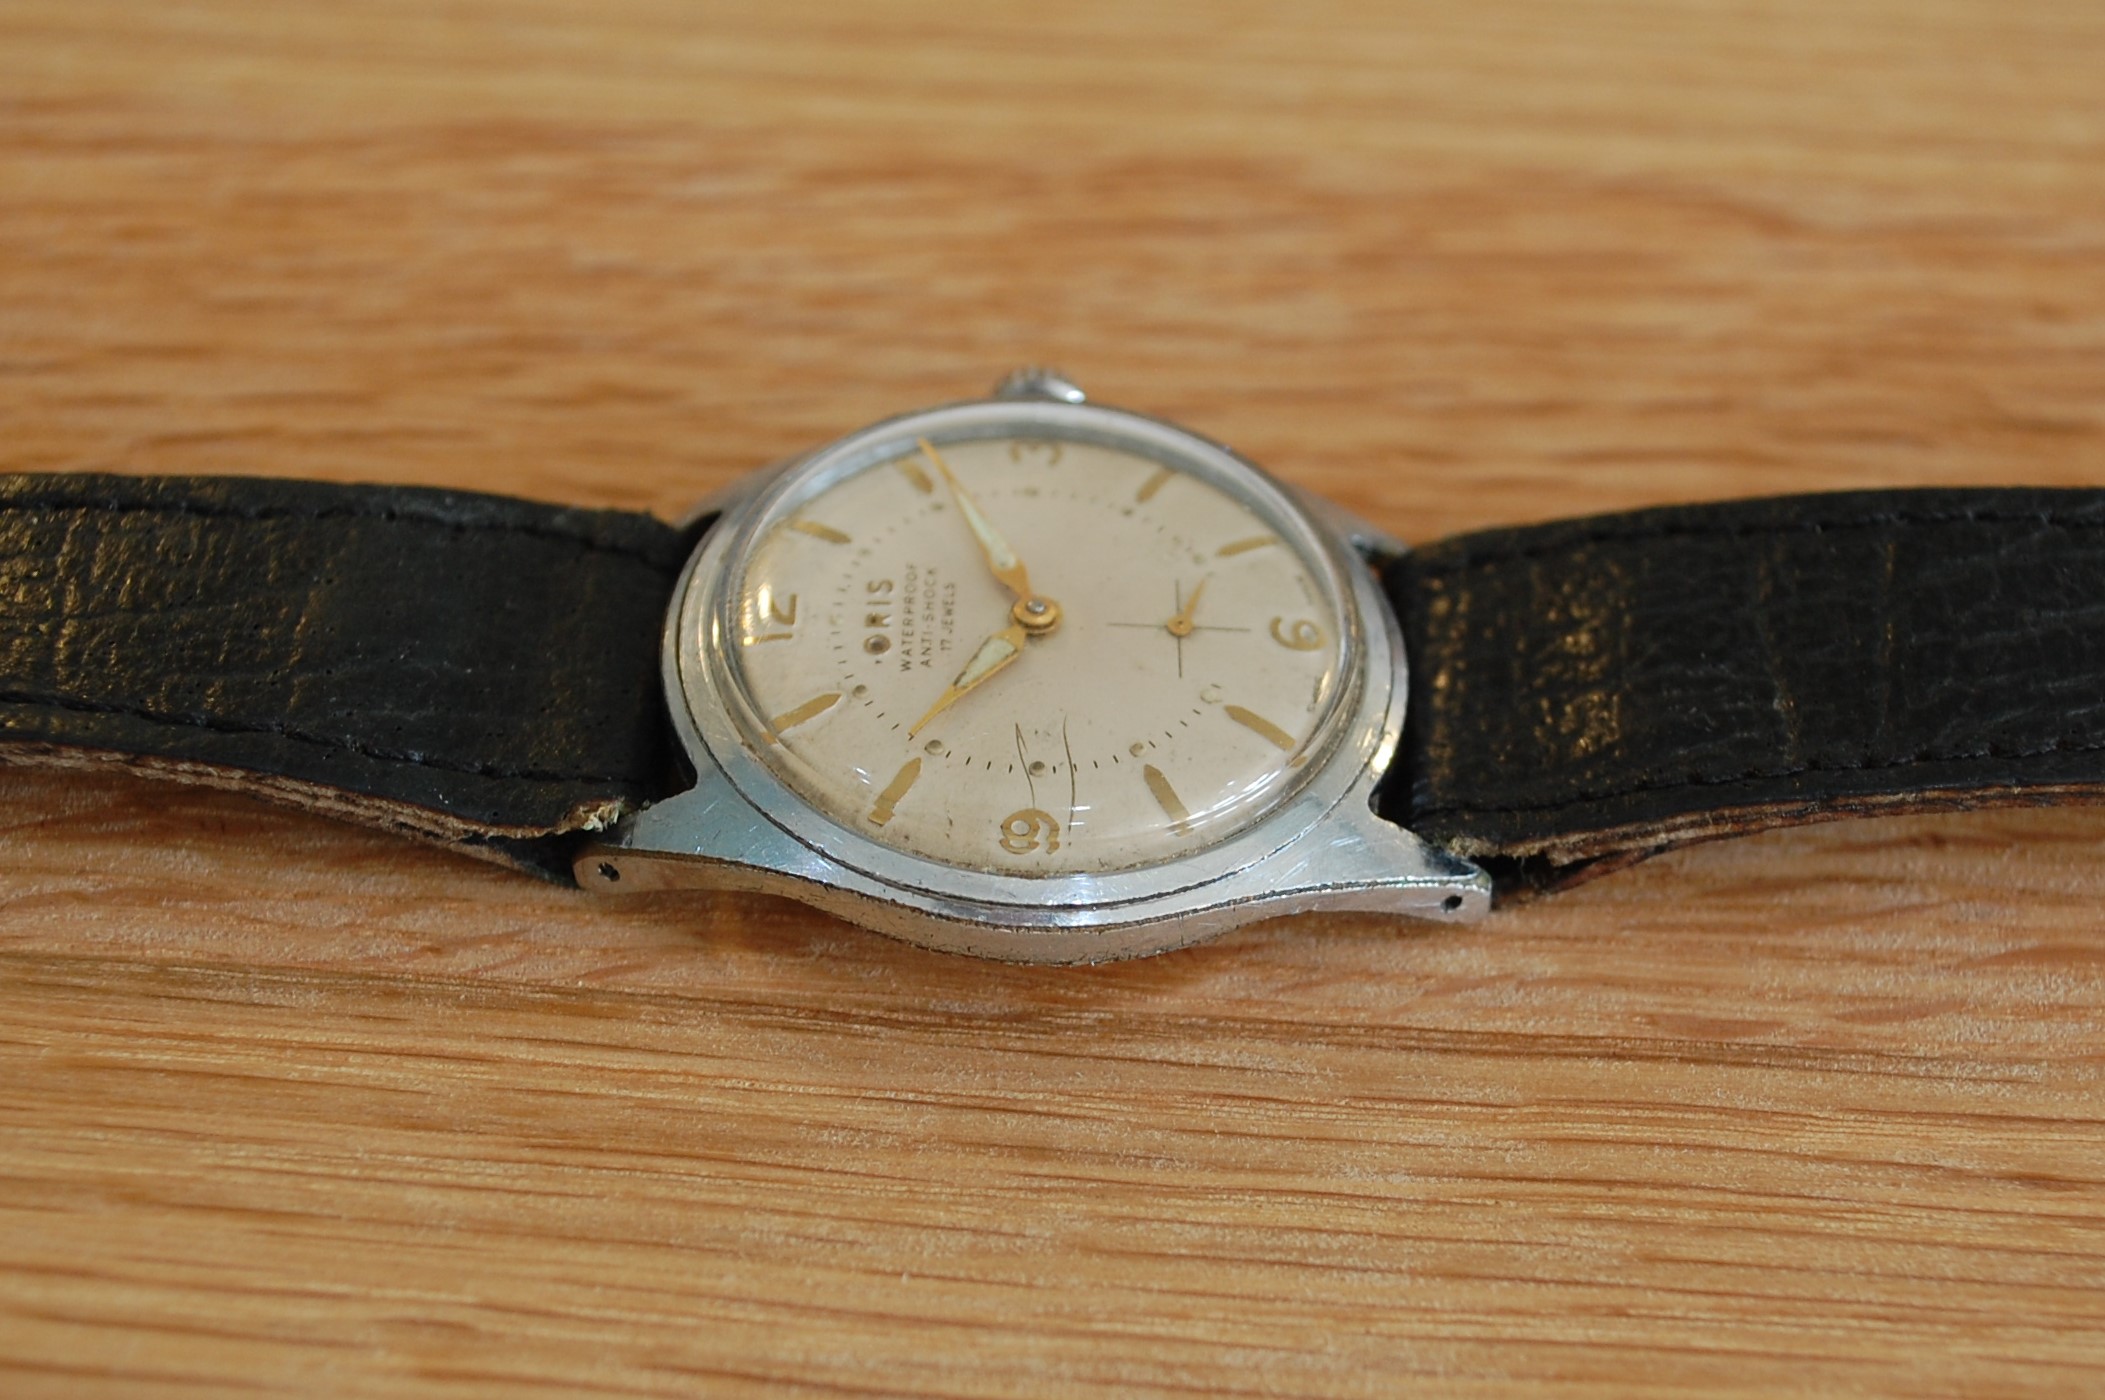 SOLD 1960 Oris men's watch with box and papers - Birth Year Watches